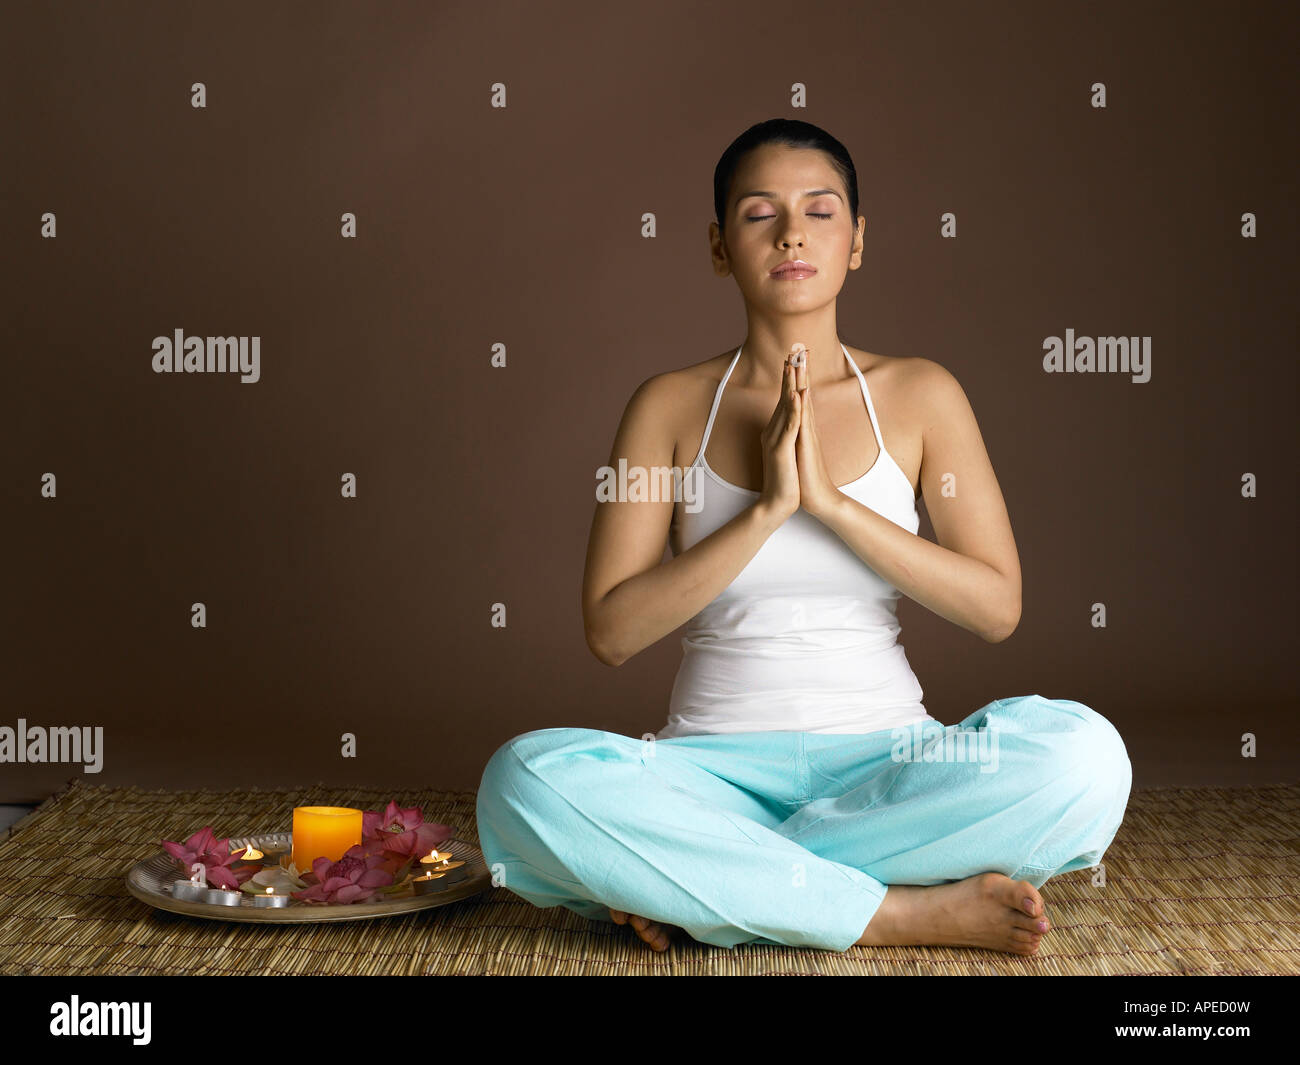 South Asian Indian woman praying with prayer utensil wearing white top and cyan pant MR # 702 Stock Photo